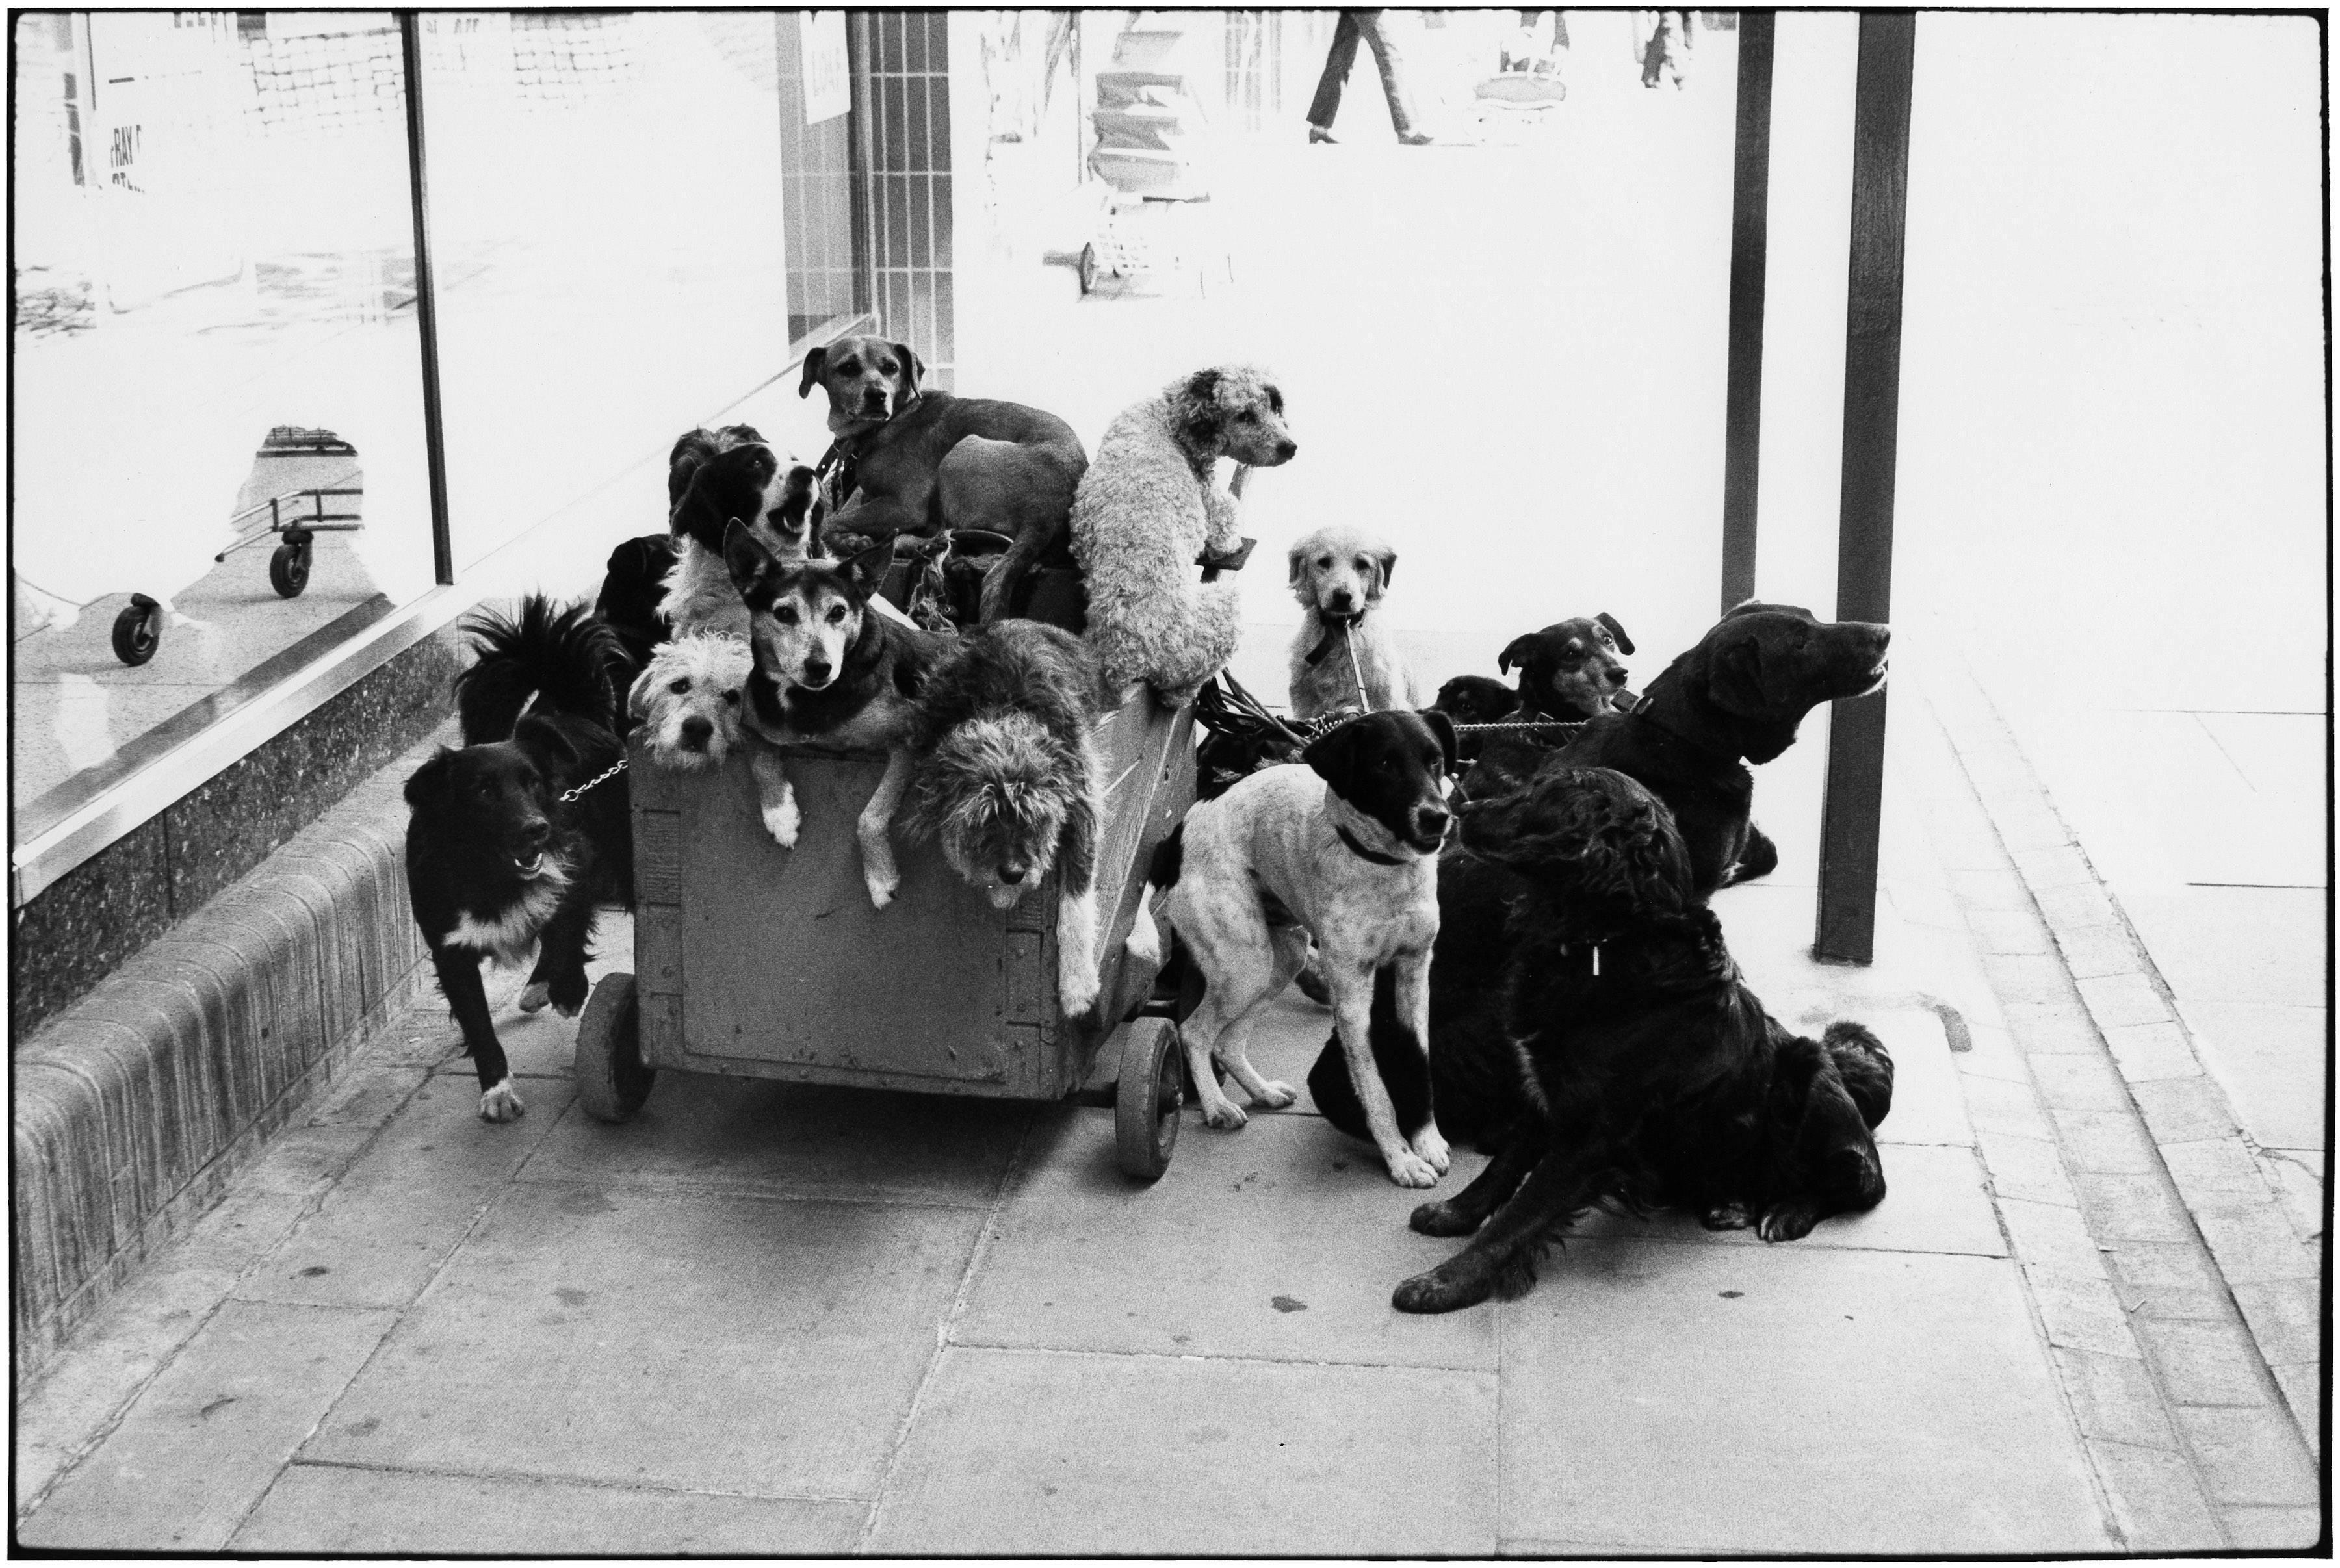 London, England, 1974 - Elliott Erwitt (Black and White Photography)
Signed, inscribed with title and dated on accompanying artist’s label
Silver gelatin print, printed later

Available in four sizes
11 x 14 inches
16 x 20 inches
20 x 24 inches
30 x